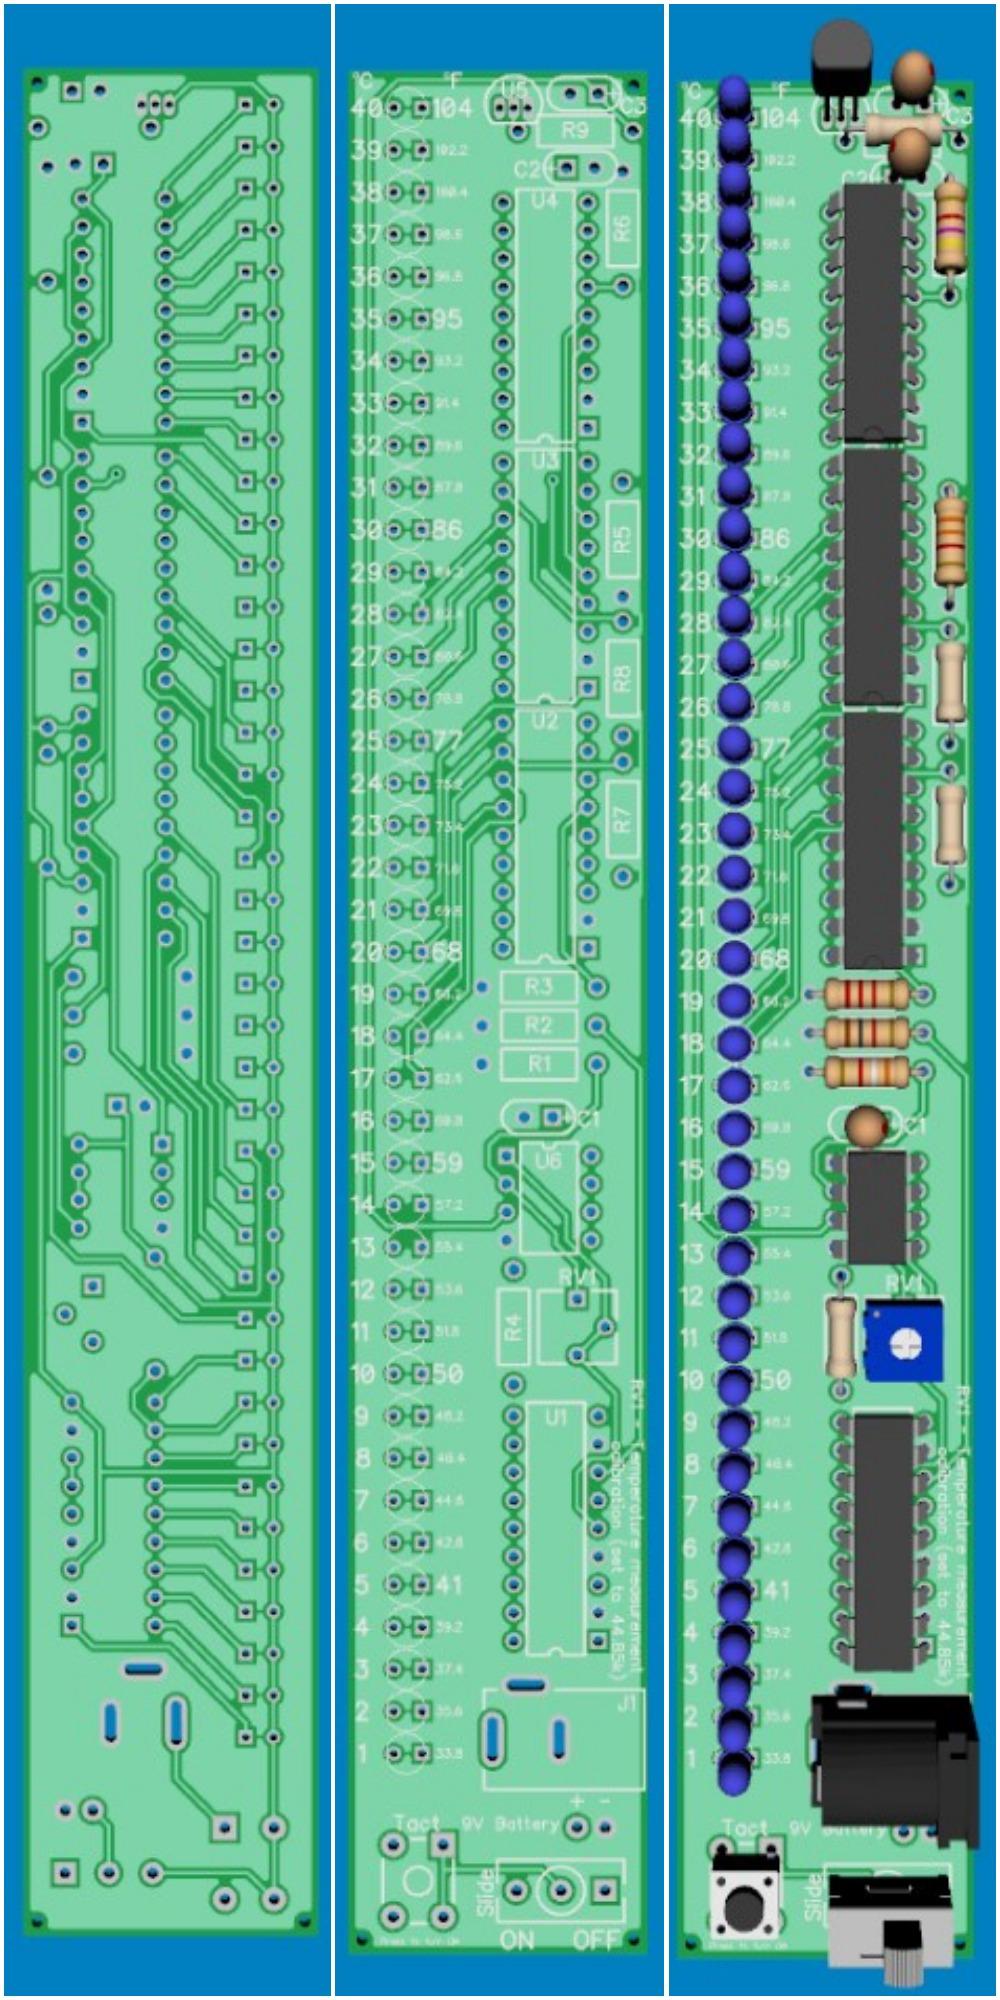 Step 2 - PCB 3D model Two layer PCB with components on top and copper on bottom and top layer. PCB dimensions are 1.063" x 6.6929". There are small mounting holes at the edges of the PCB.